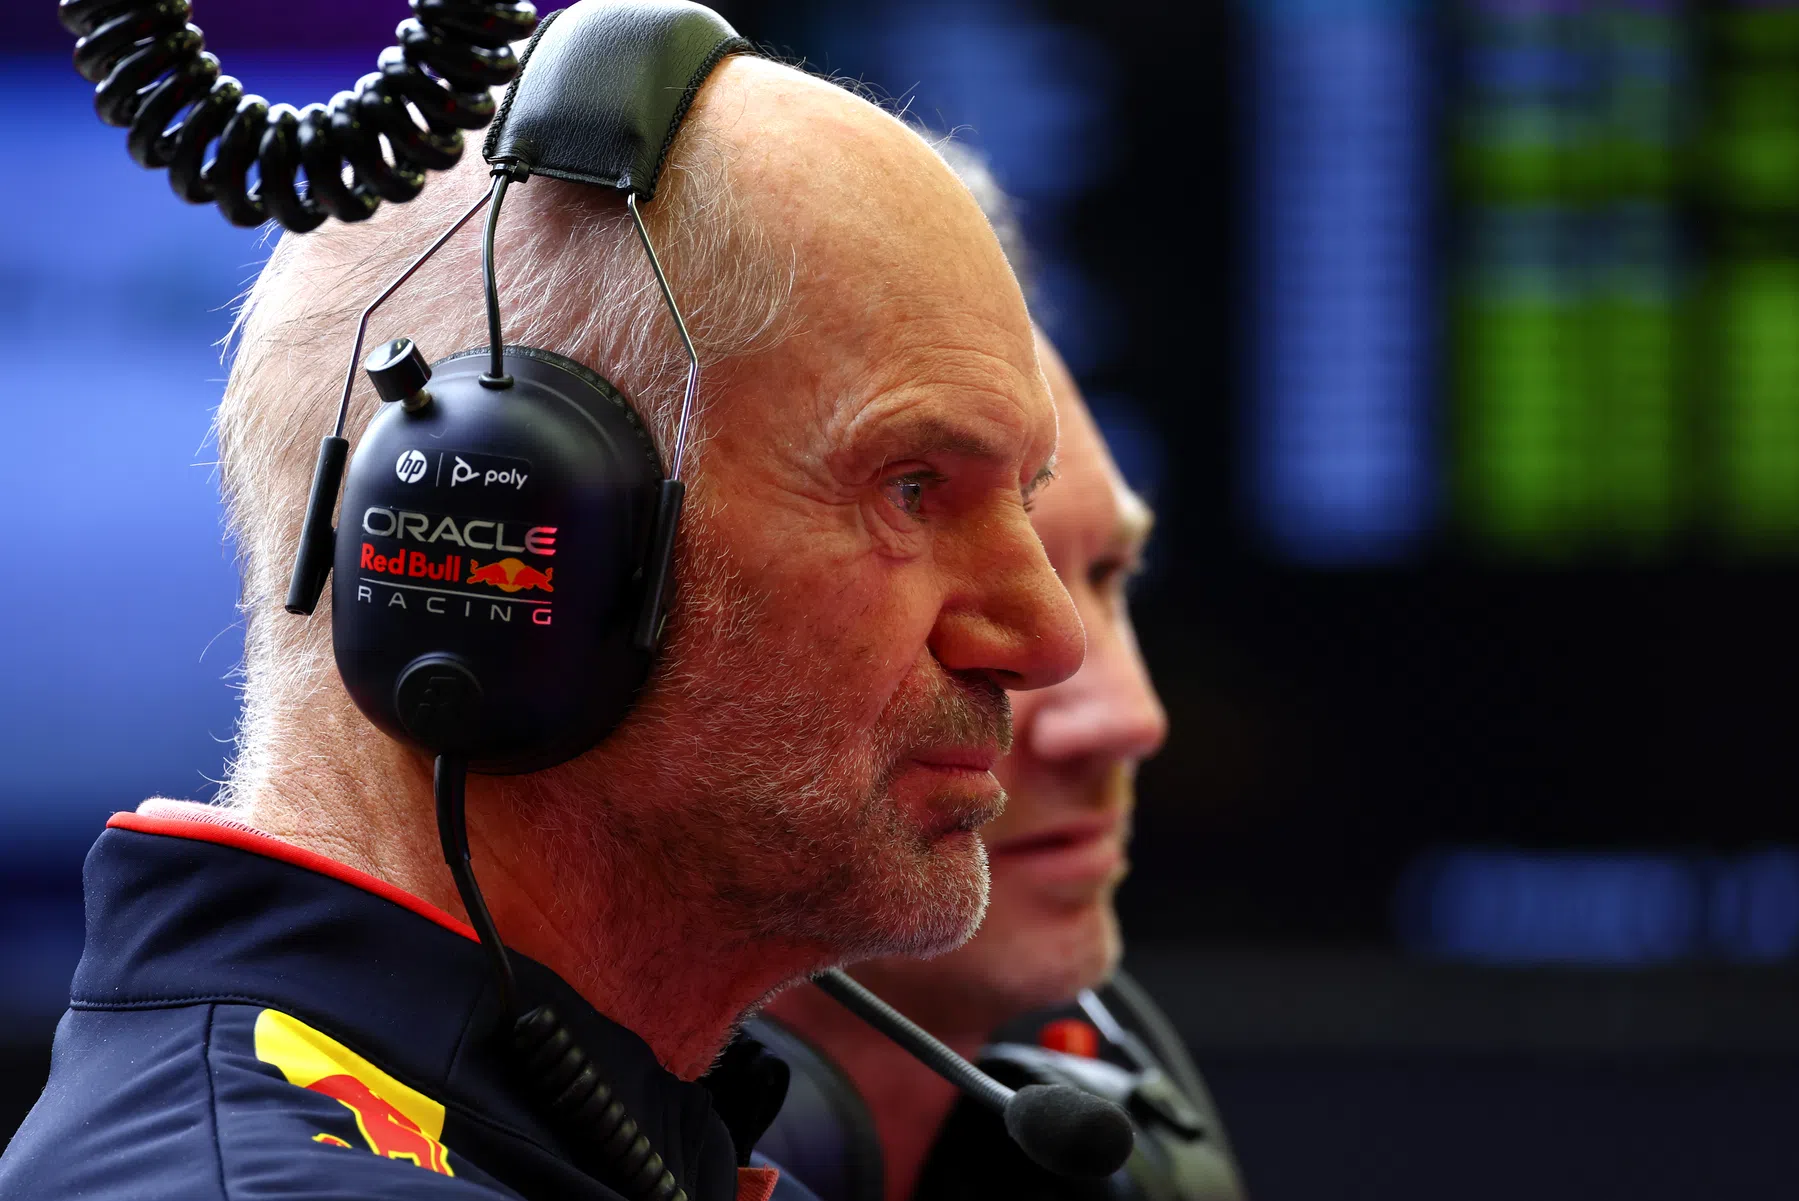 sergio perez on adrian newey's departure at red bull racing